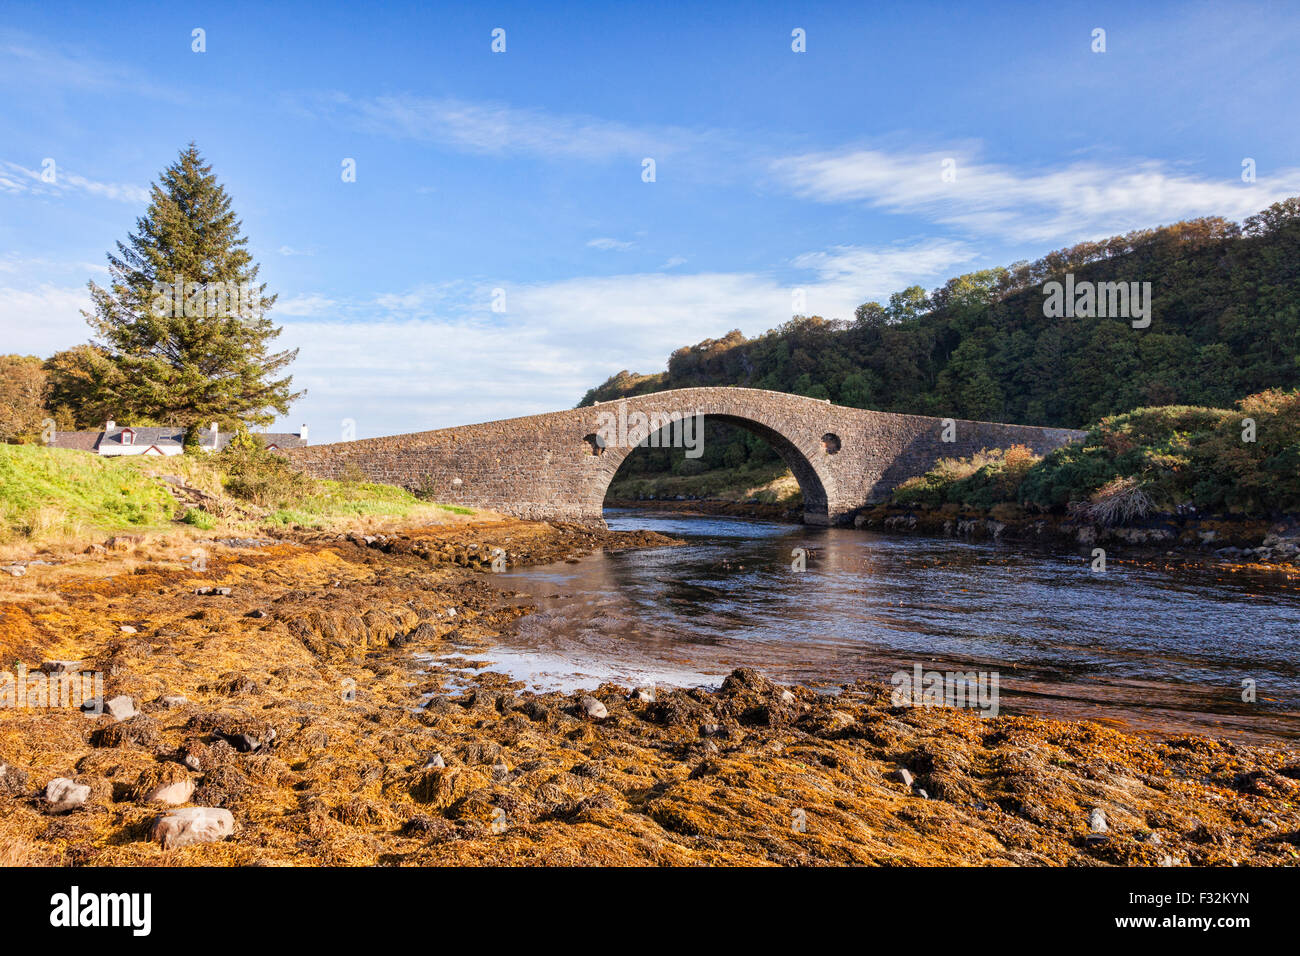 The Clachan Bridge, known as the Bridge Over the Atlantic, which connects the Scottish mainland with the Island of Seil... Stock Photo